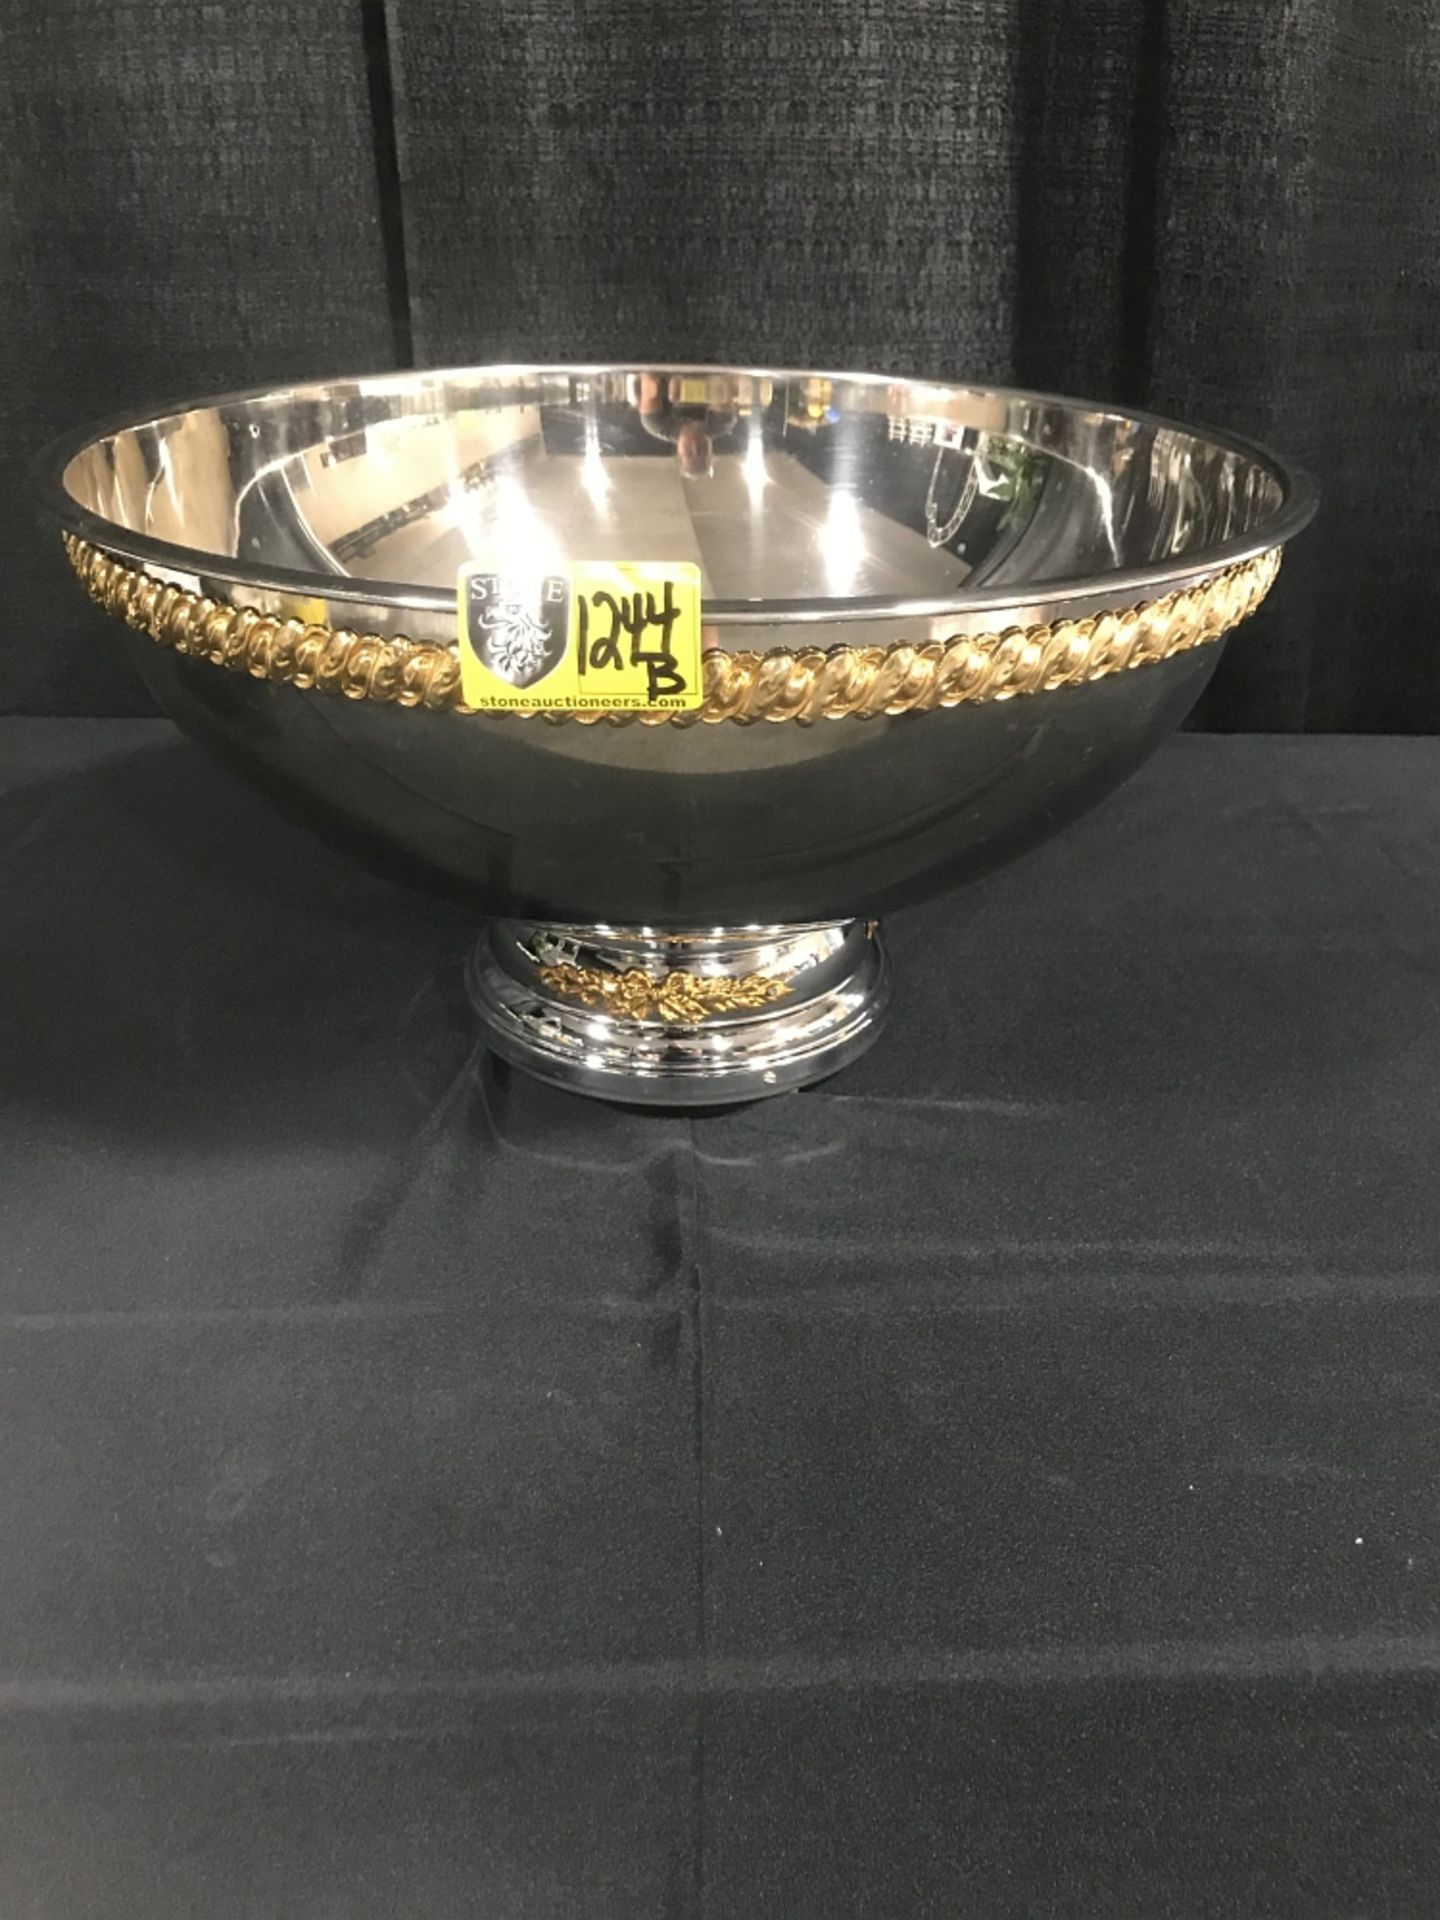 Stainless Steel Salad/Punch Bowl 5 Gallon w/ Gold Trim